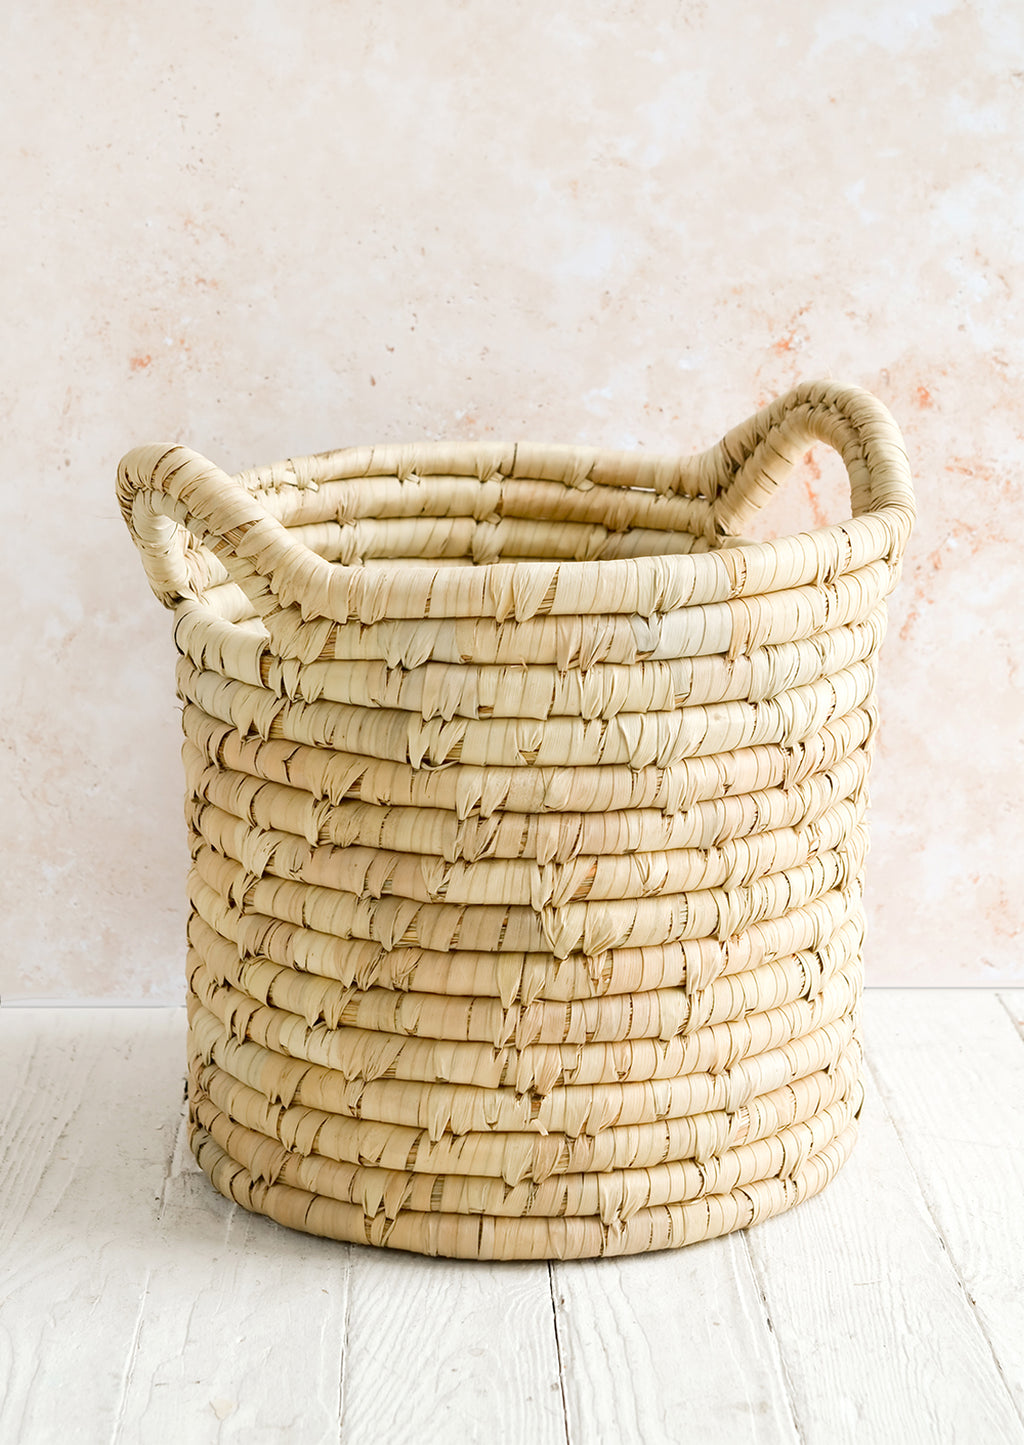 1: A round, open-top storage bin woven from natural palm leaf